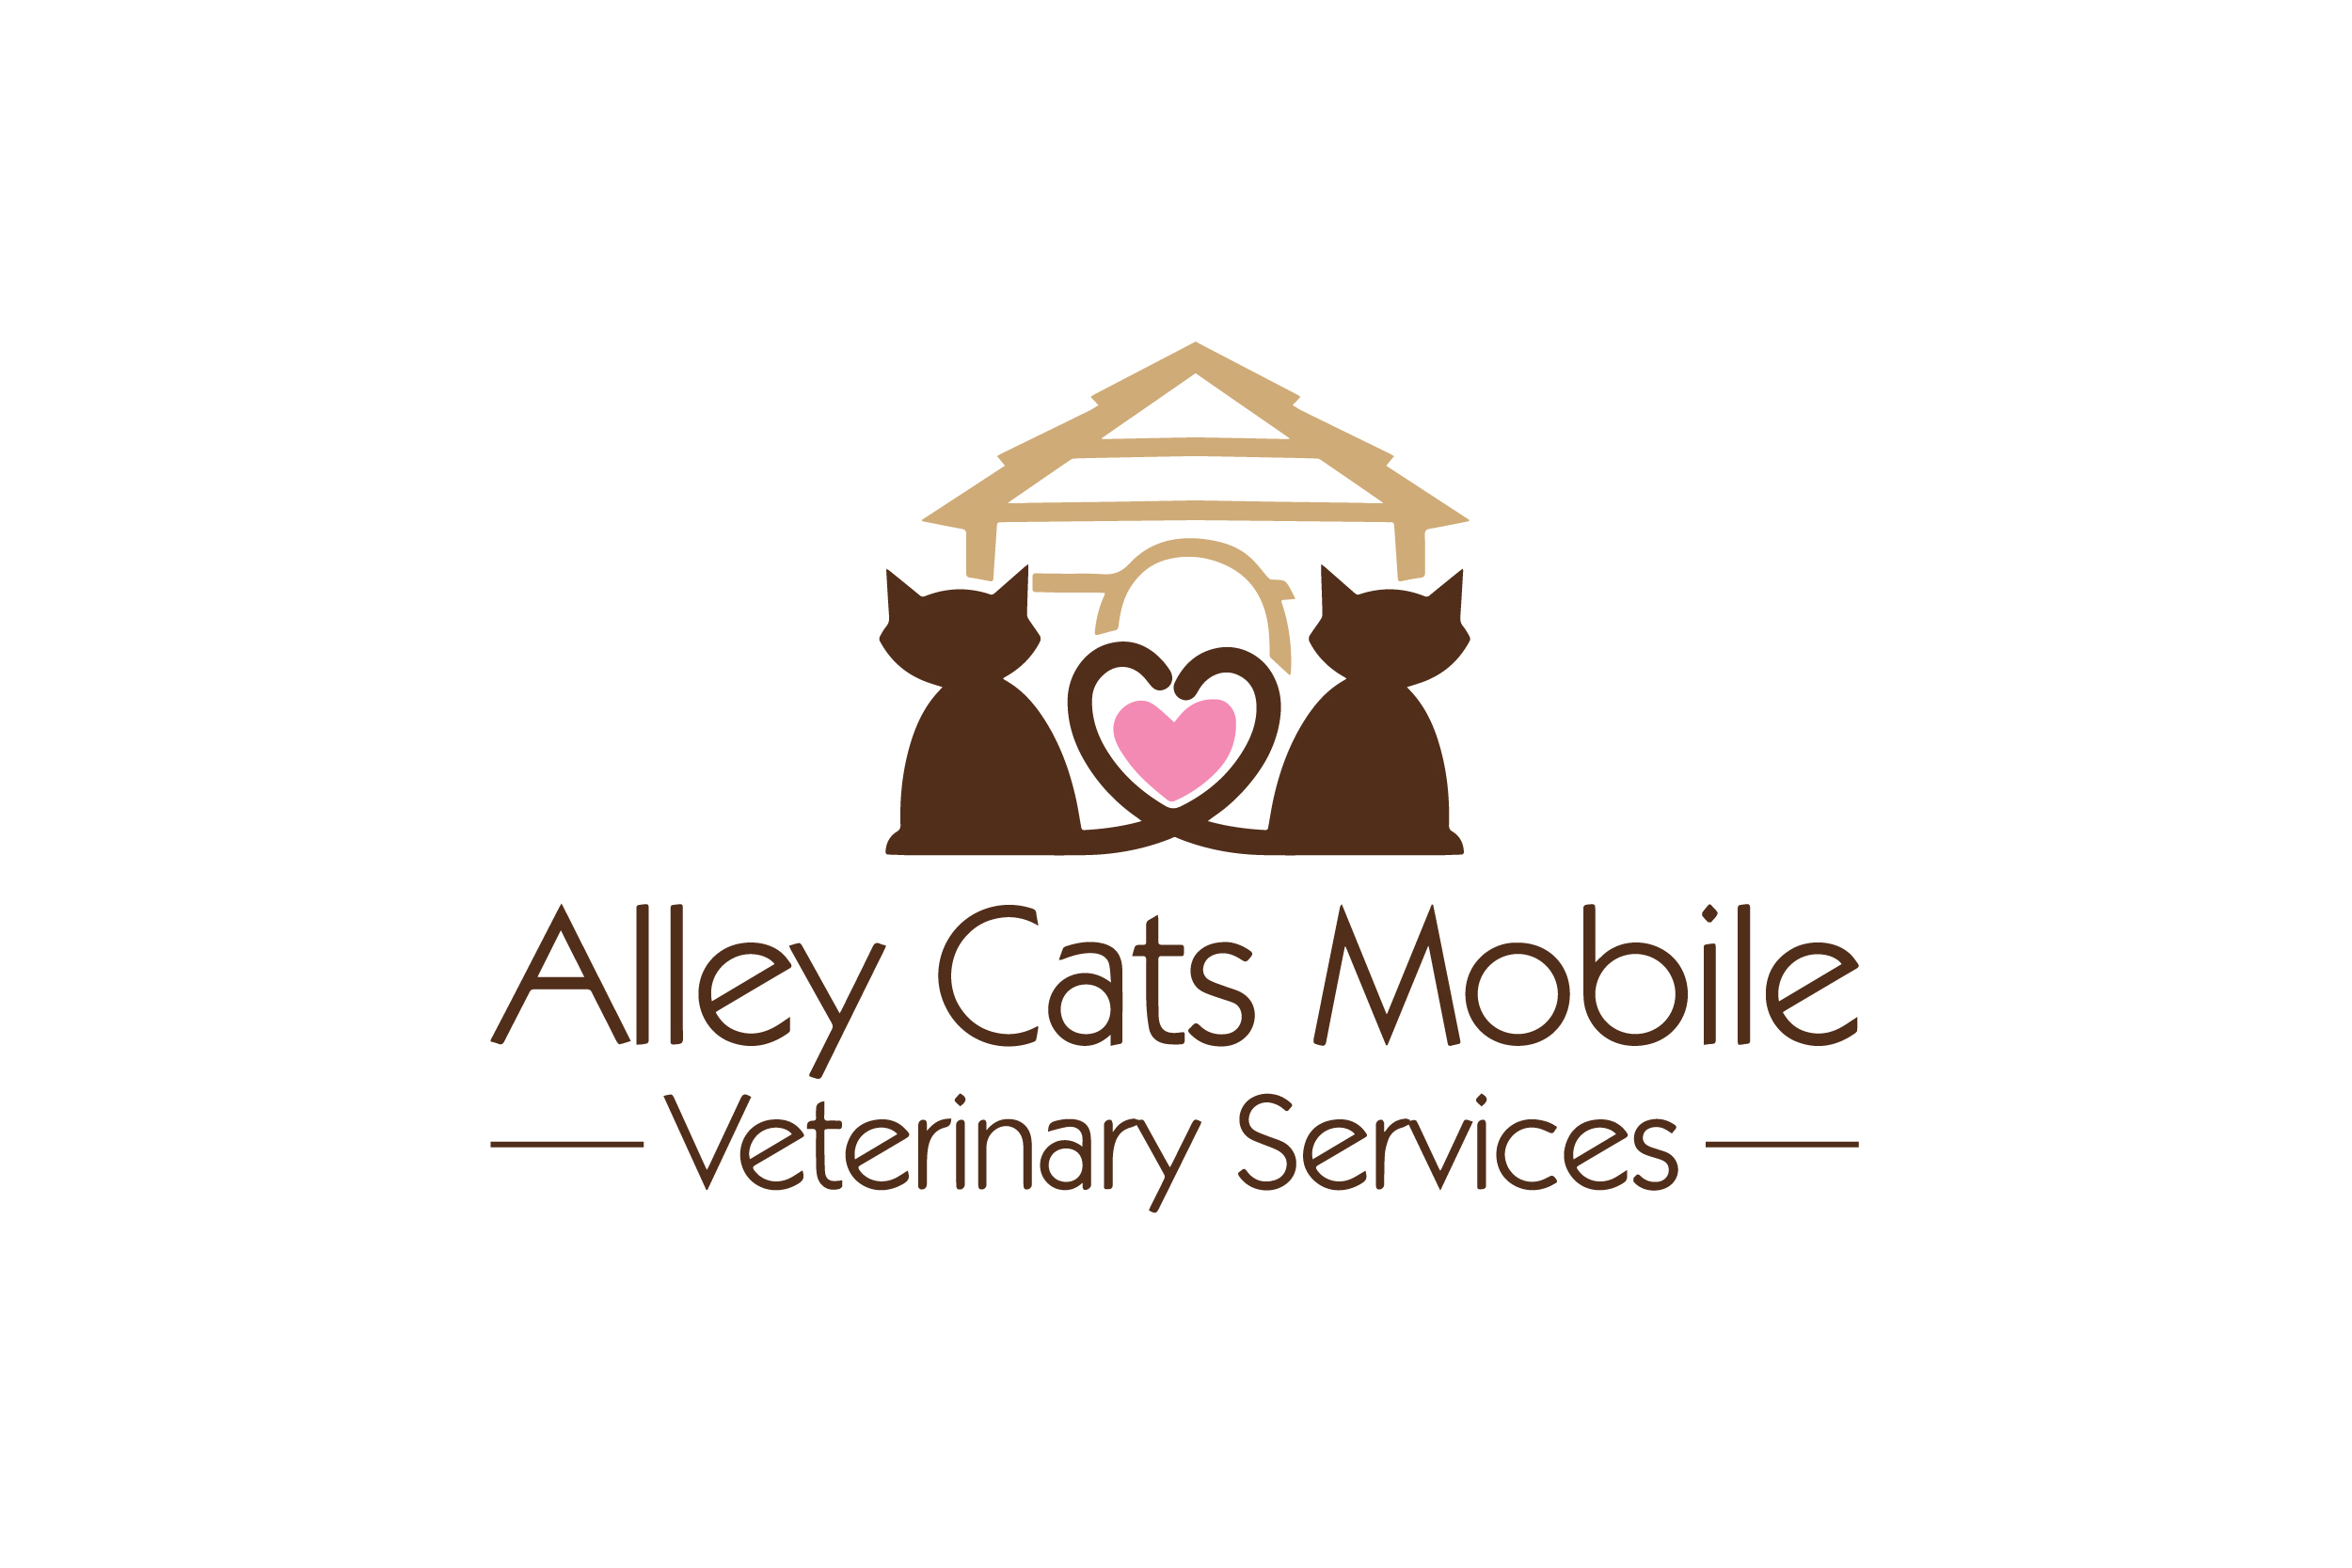 Alley Cats Mobile vet